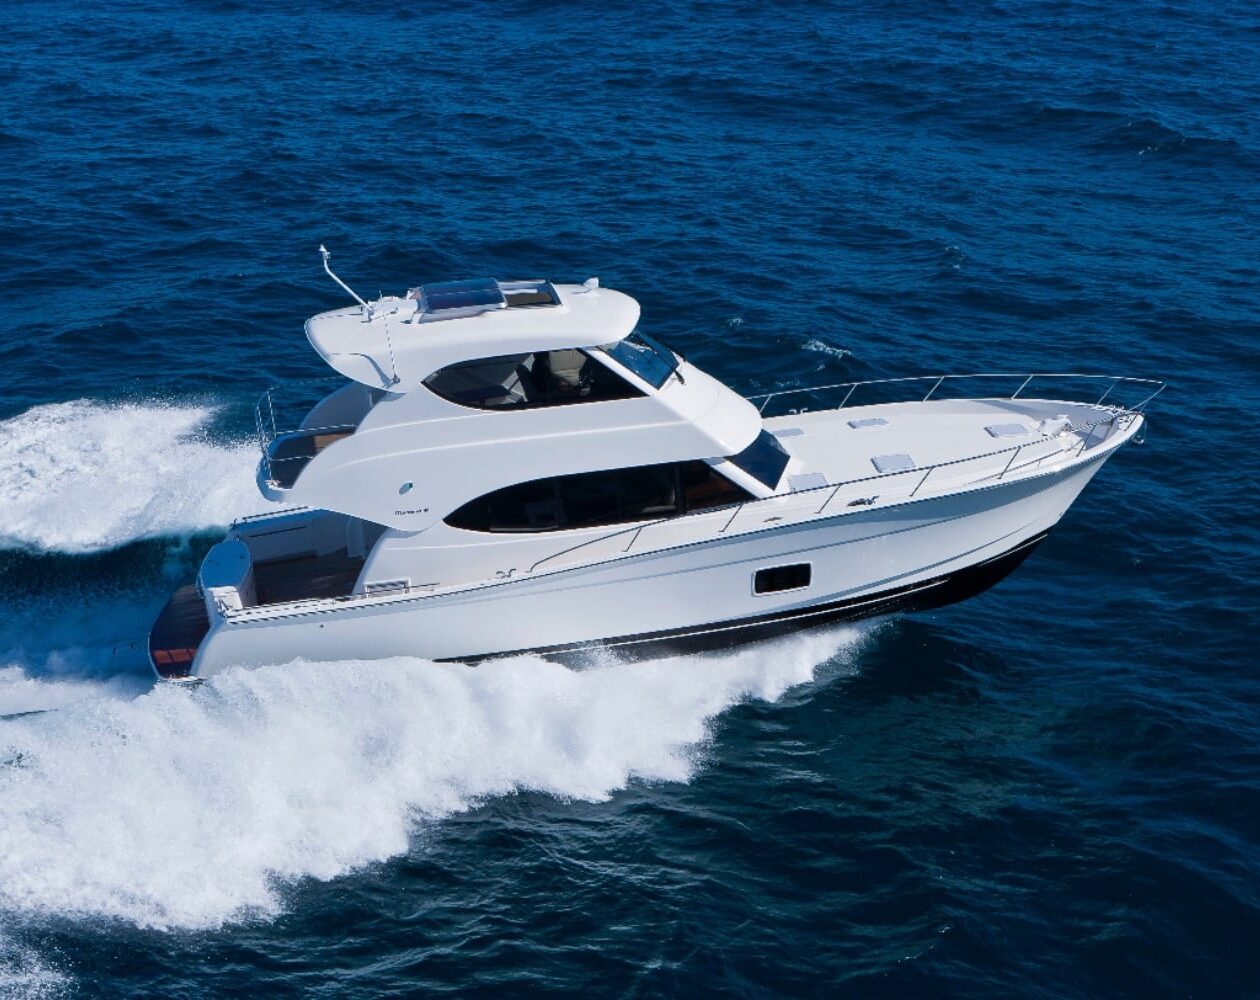 The dawn of the iconic Maritimo 52 and Maritimo 48 models